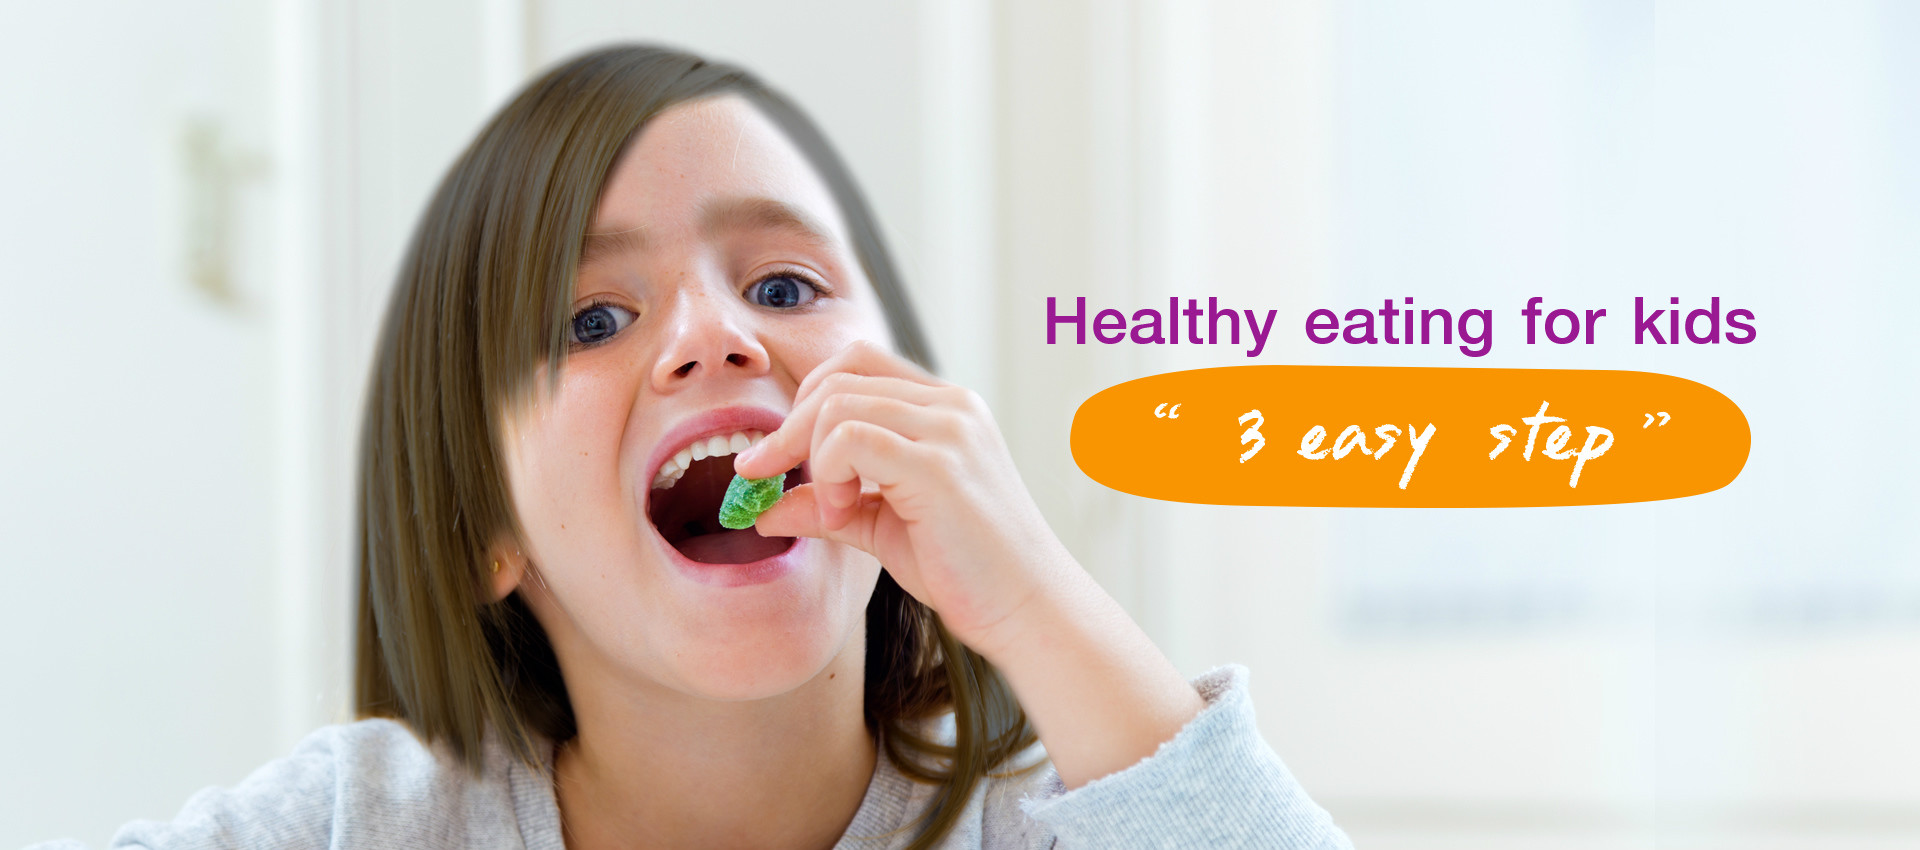 Healthy eating for kids in 3 easy steps